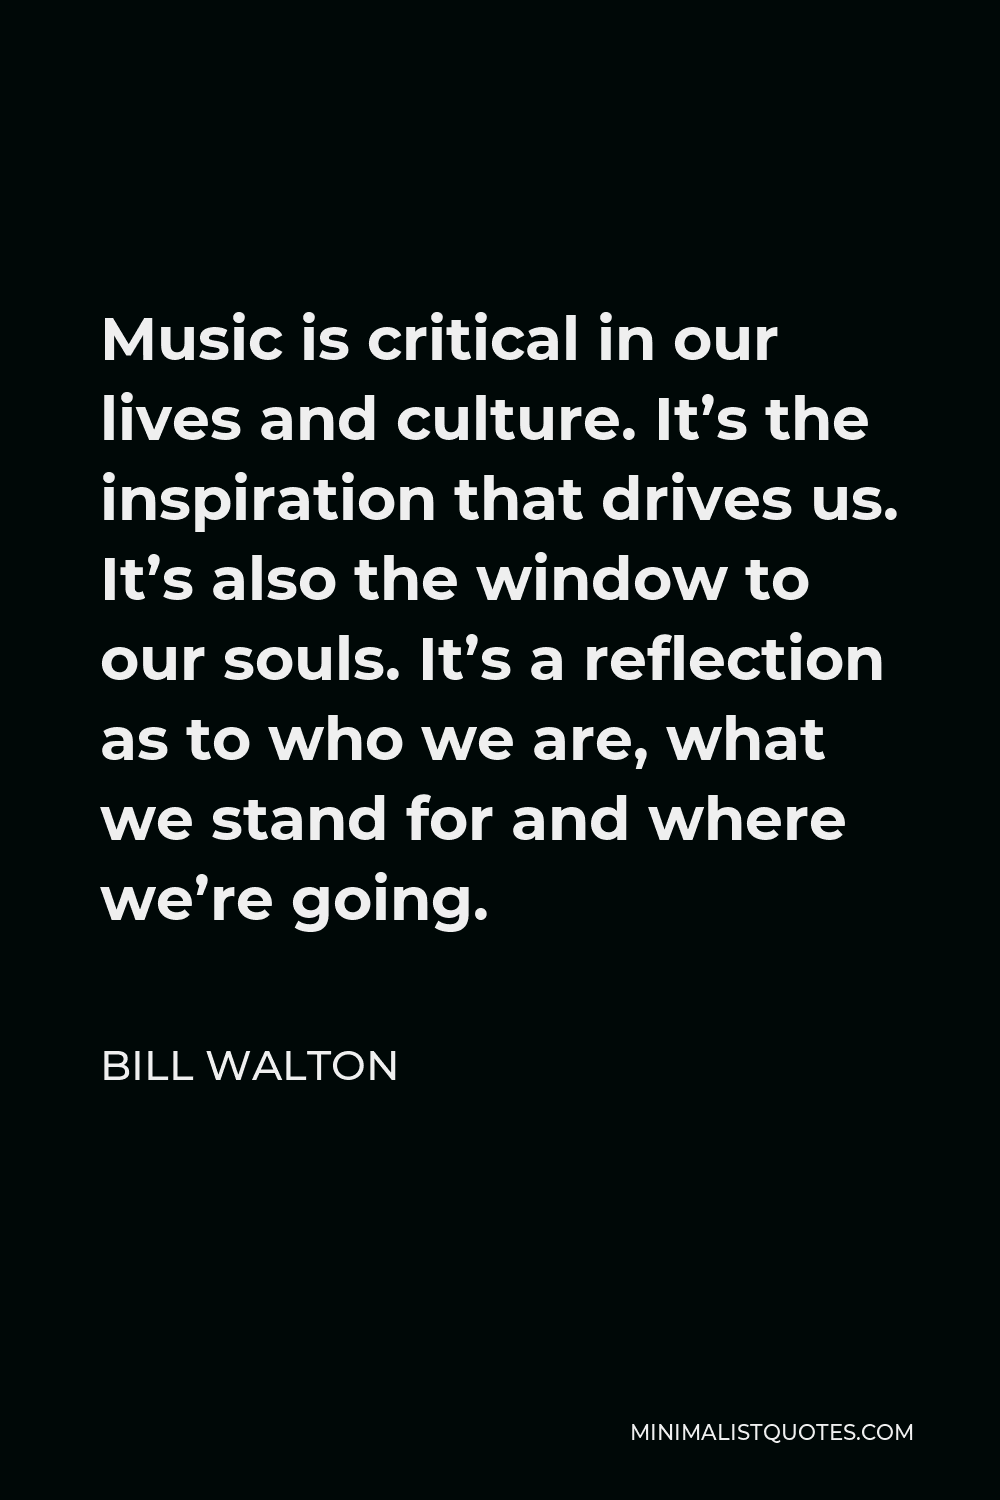 Bill Walton Quote - Music is critical in our lives and culture. It’s the inspiration that drives us. It’s also the window to our souls. It’s a reflection as to who we are, what we stand for and where we’re going.